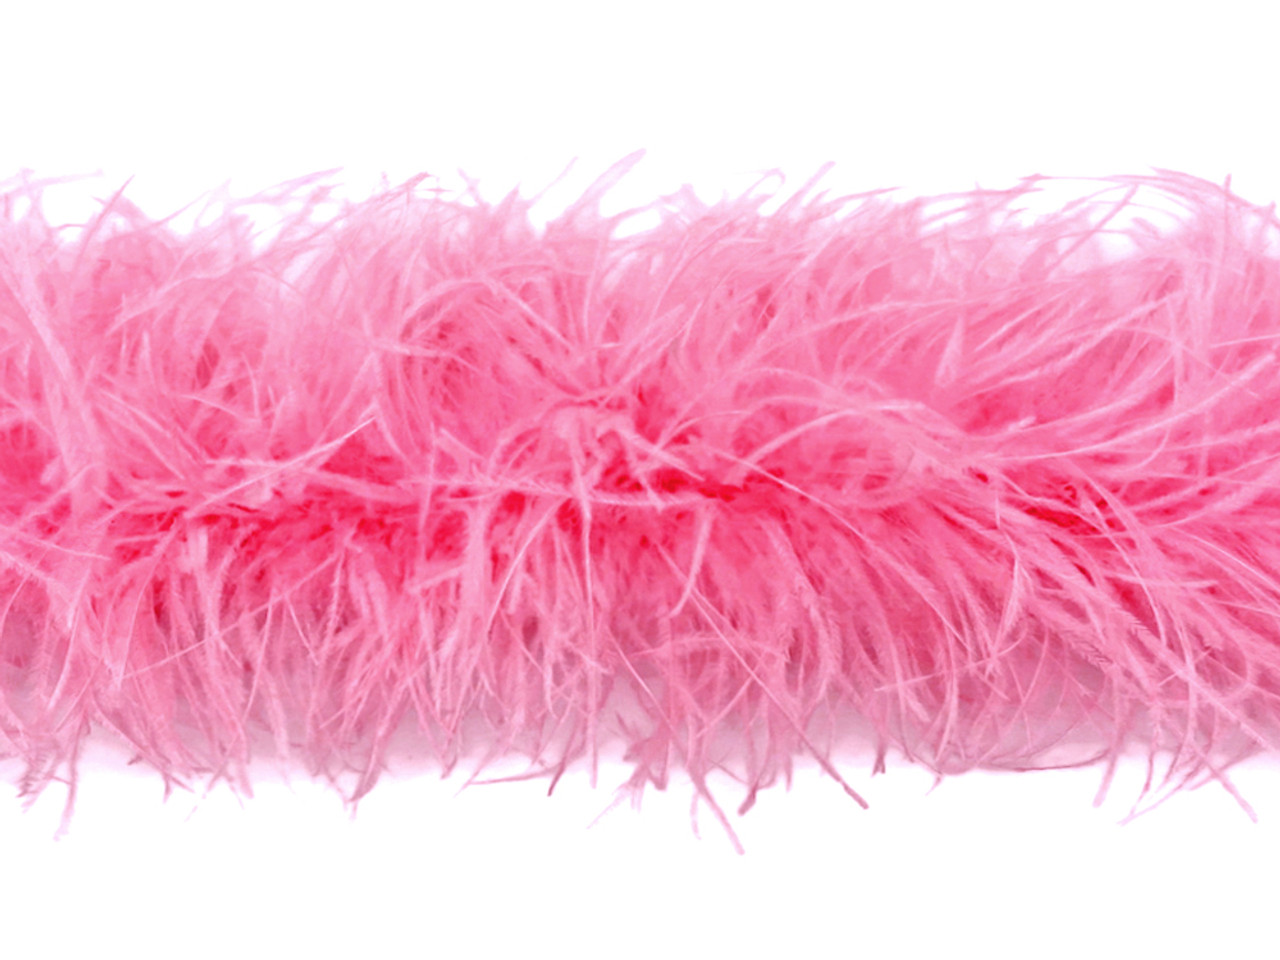 3 Ply Pink Fluffy Feather Boa - 1 Piece